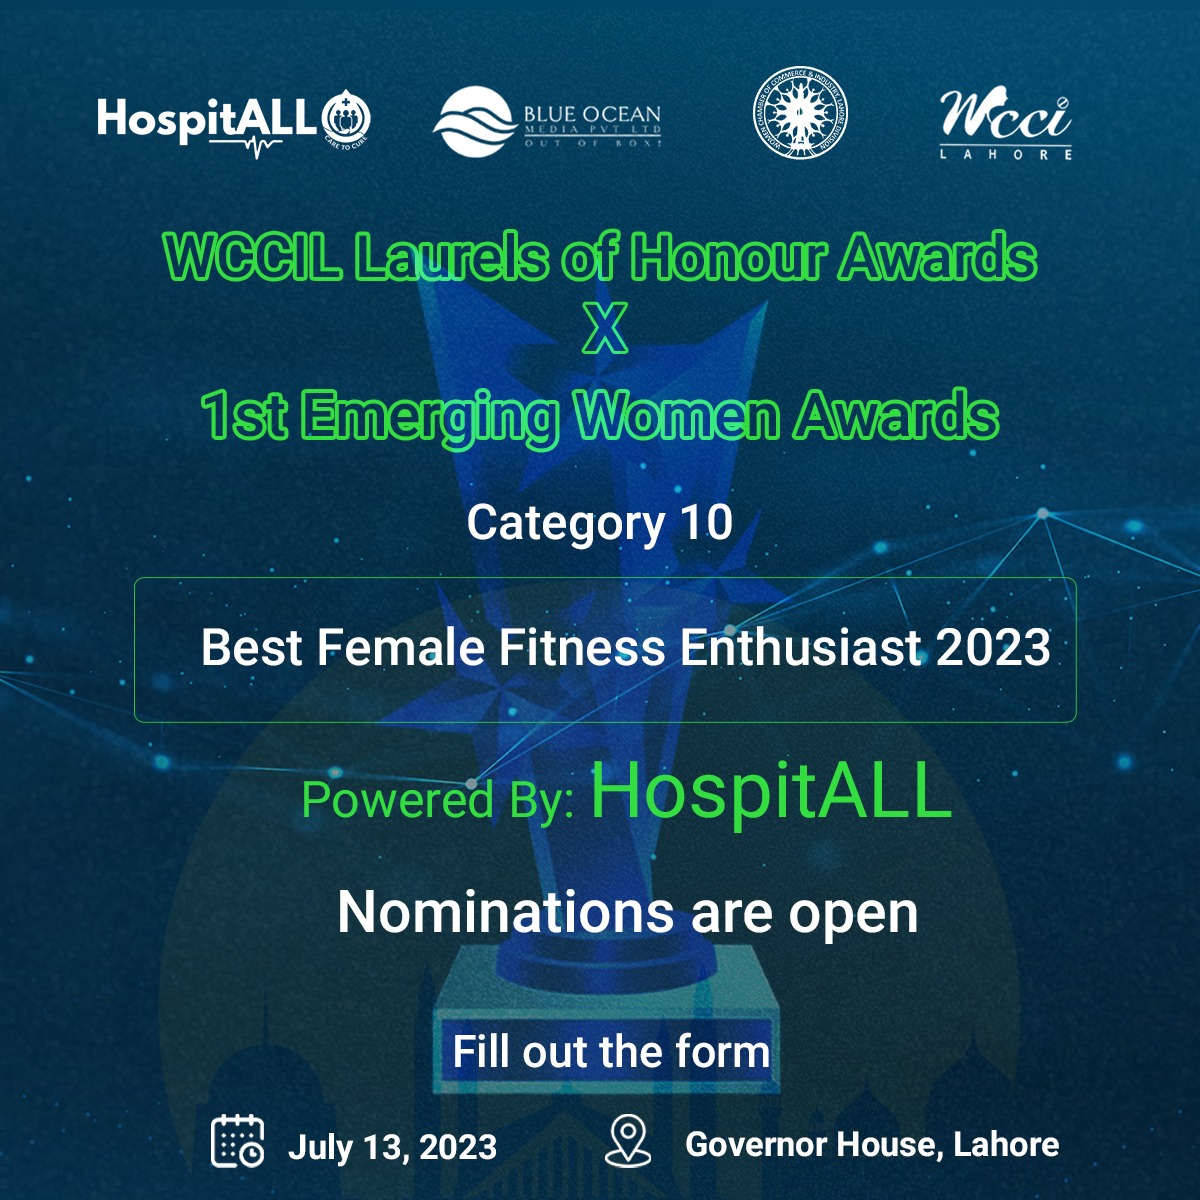 Are you an emerging female fitness enthusiast?

This is your chance to get featured, and make your mark.

Tag your colleagues and peers, share with your network, nominate yourself or your fellows.

Fill out the nomination form today: https://t.co/EiOordL7qp

#emergingwomen https://t.co/0r2YezP28Y